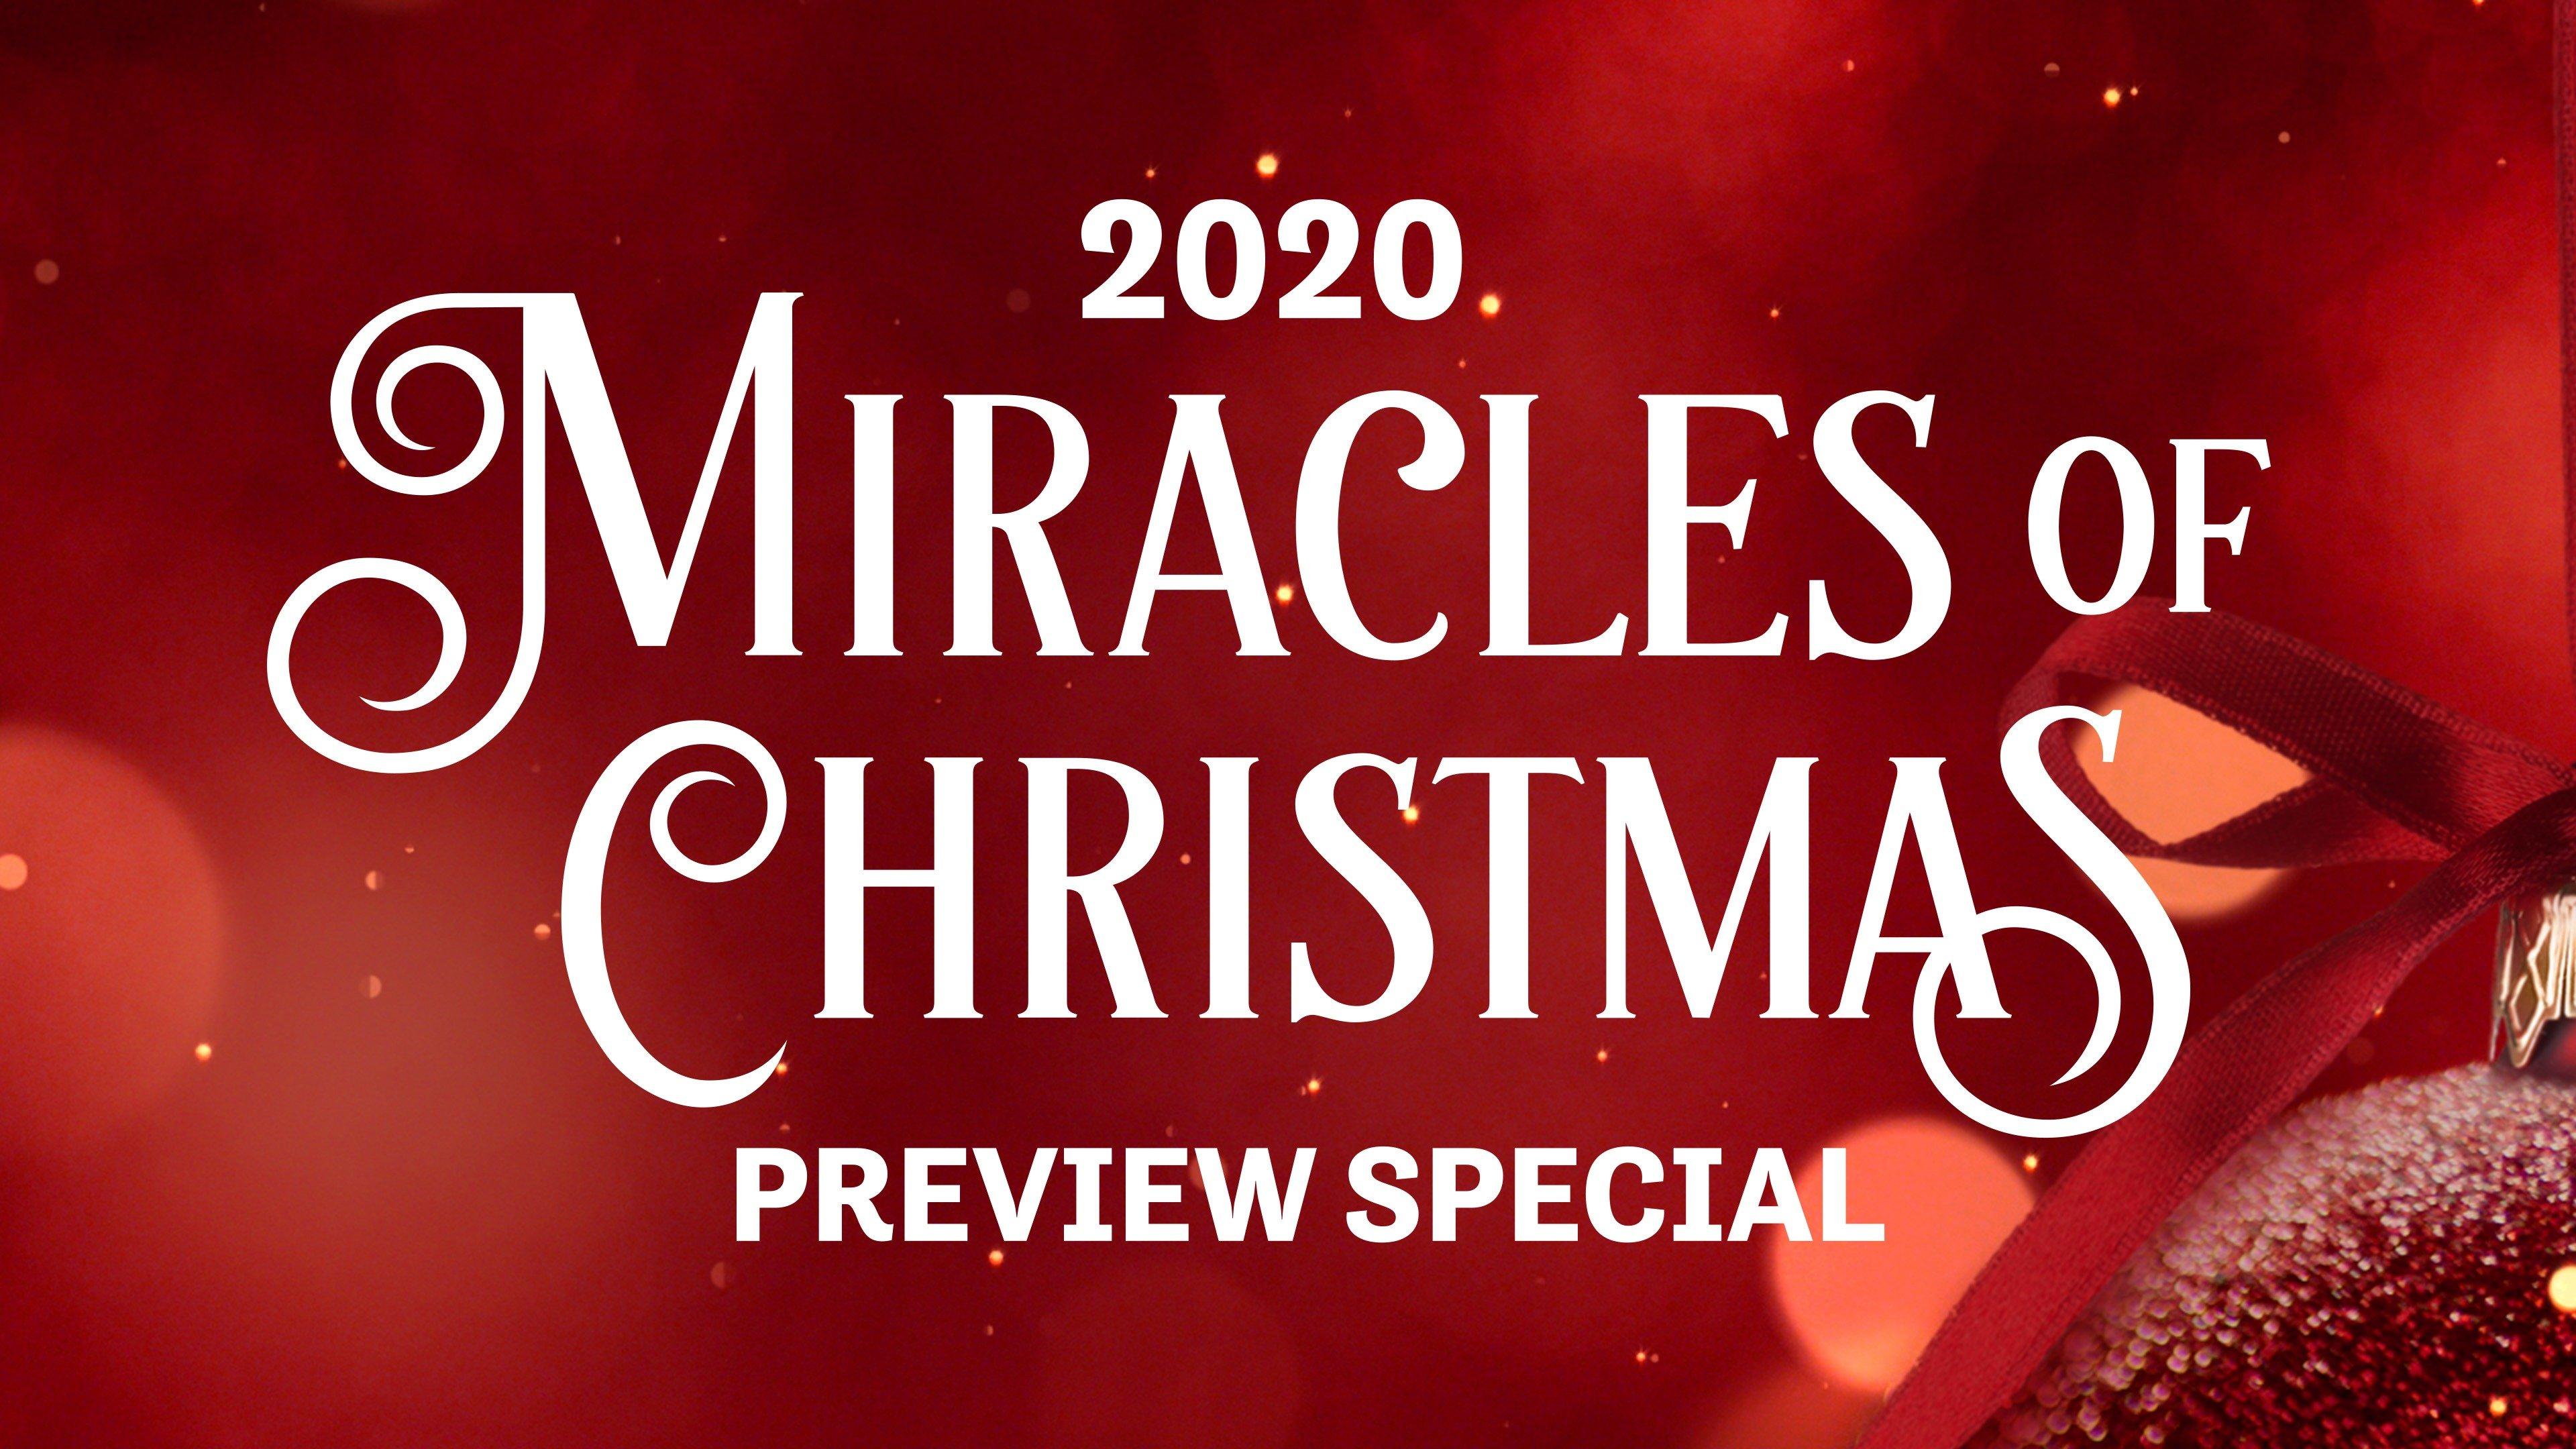 2020 Miracles of Christmas Preview Special